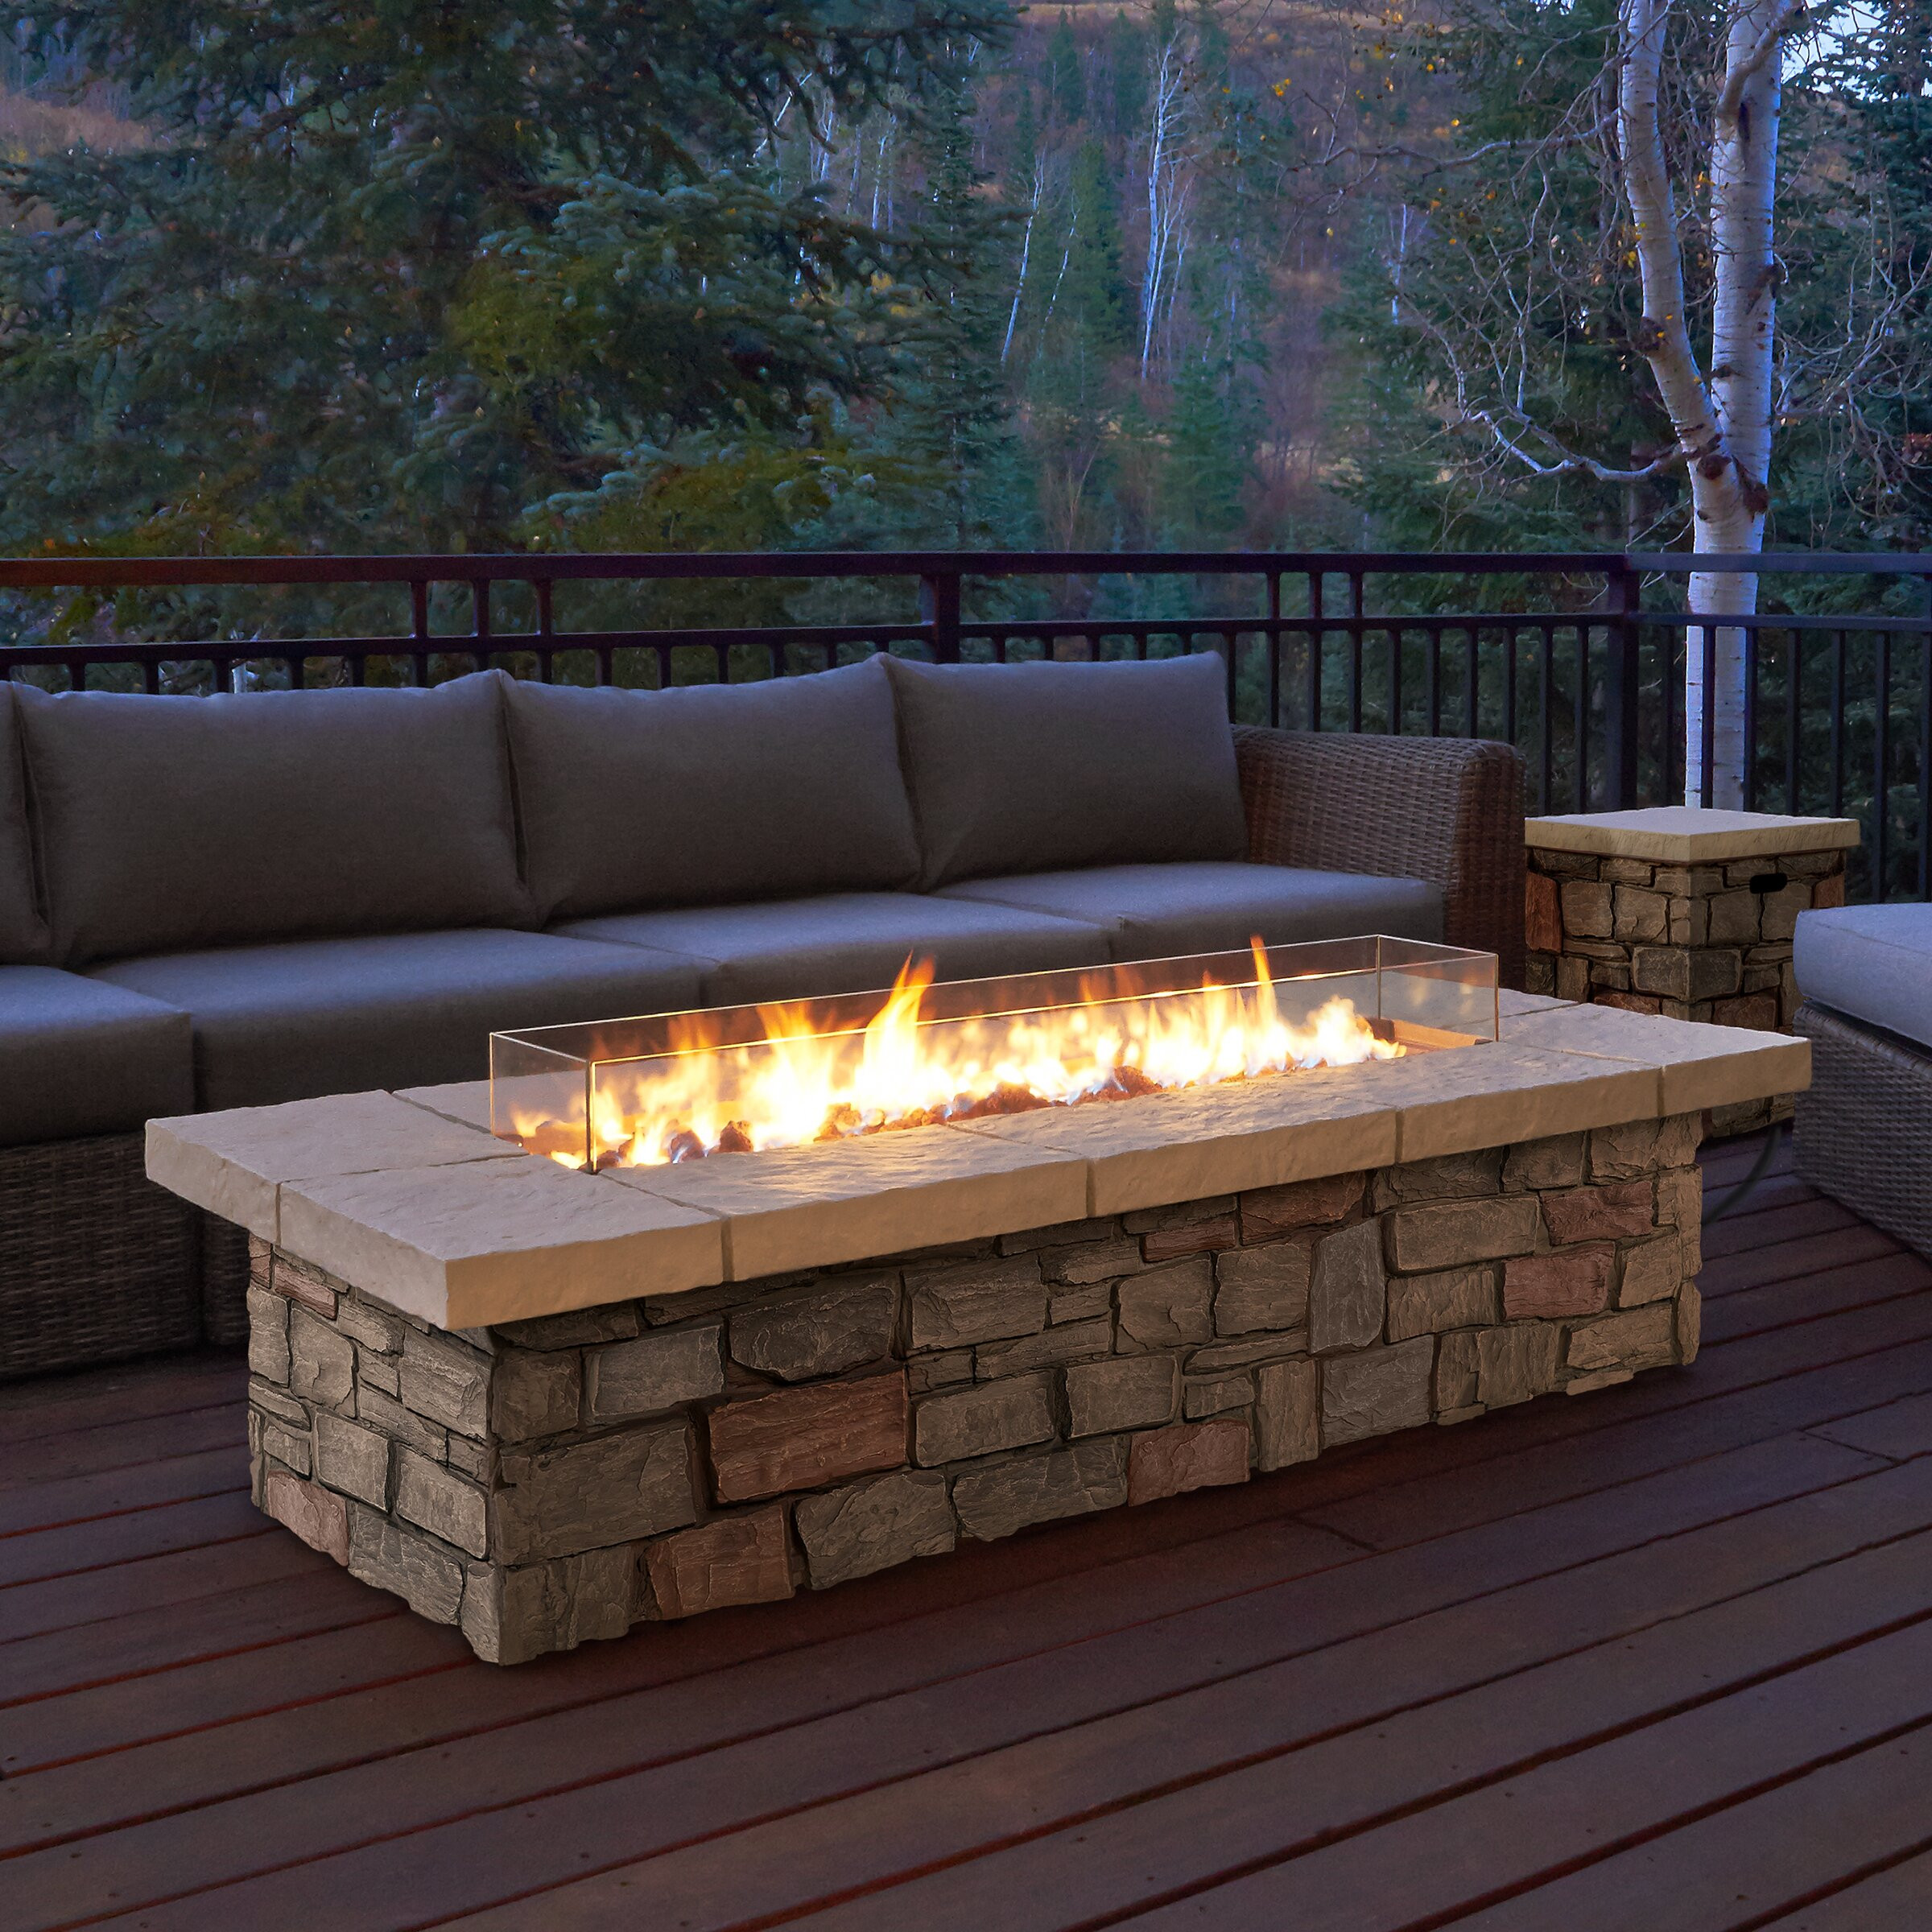 DIY Outdoor Propane Fire Pit
 Real Flame Sedona Propane Fire Pit Table & Reviews